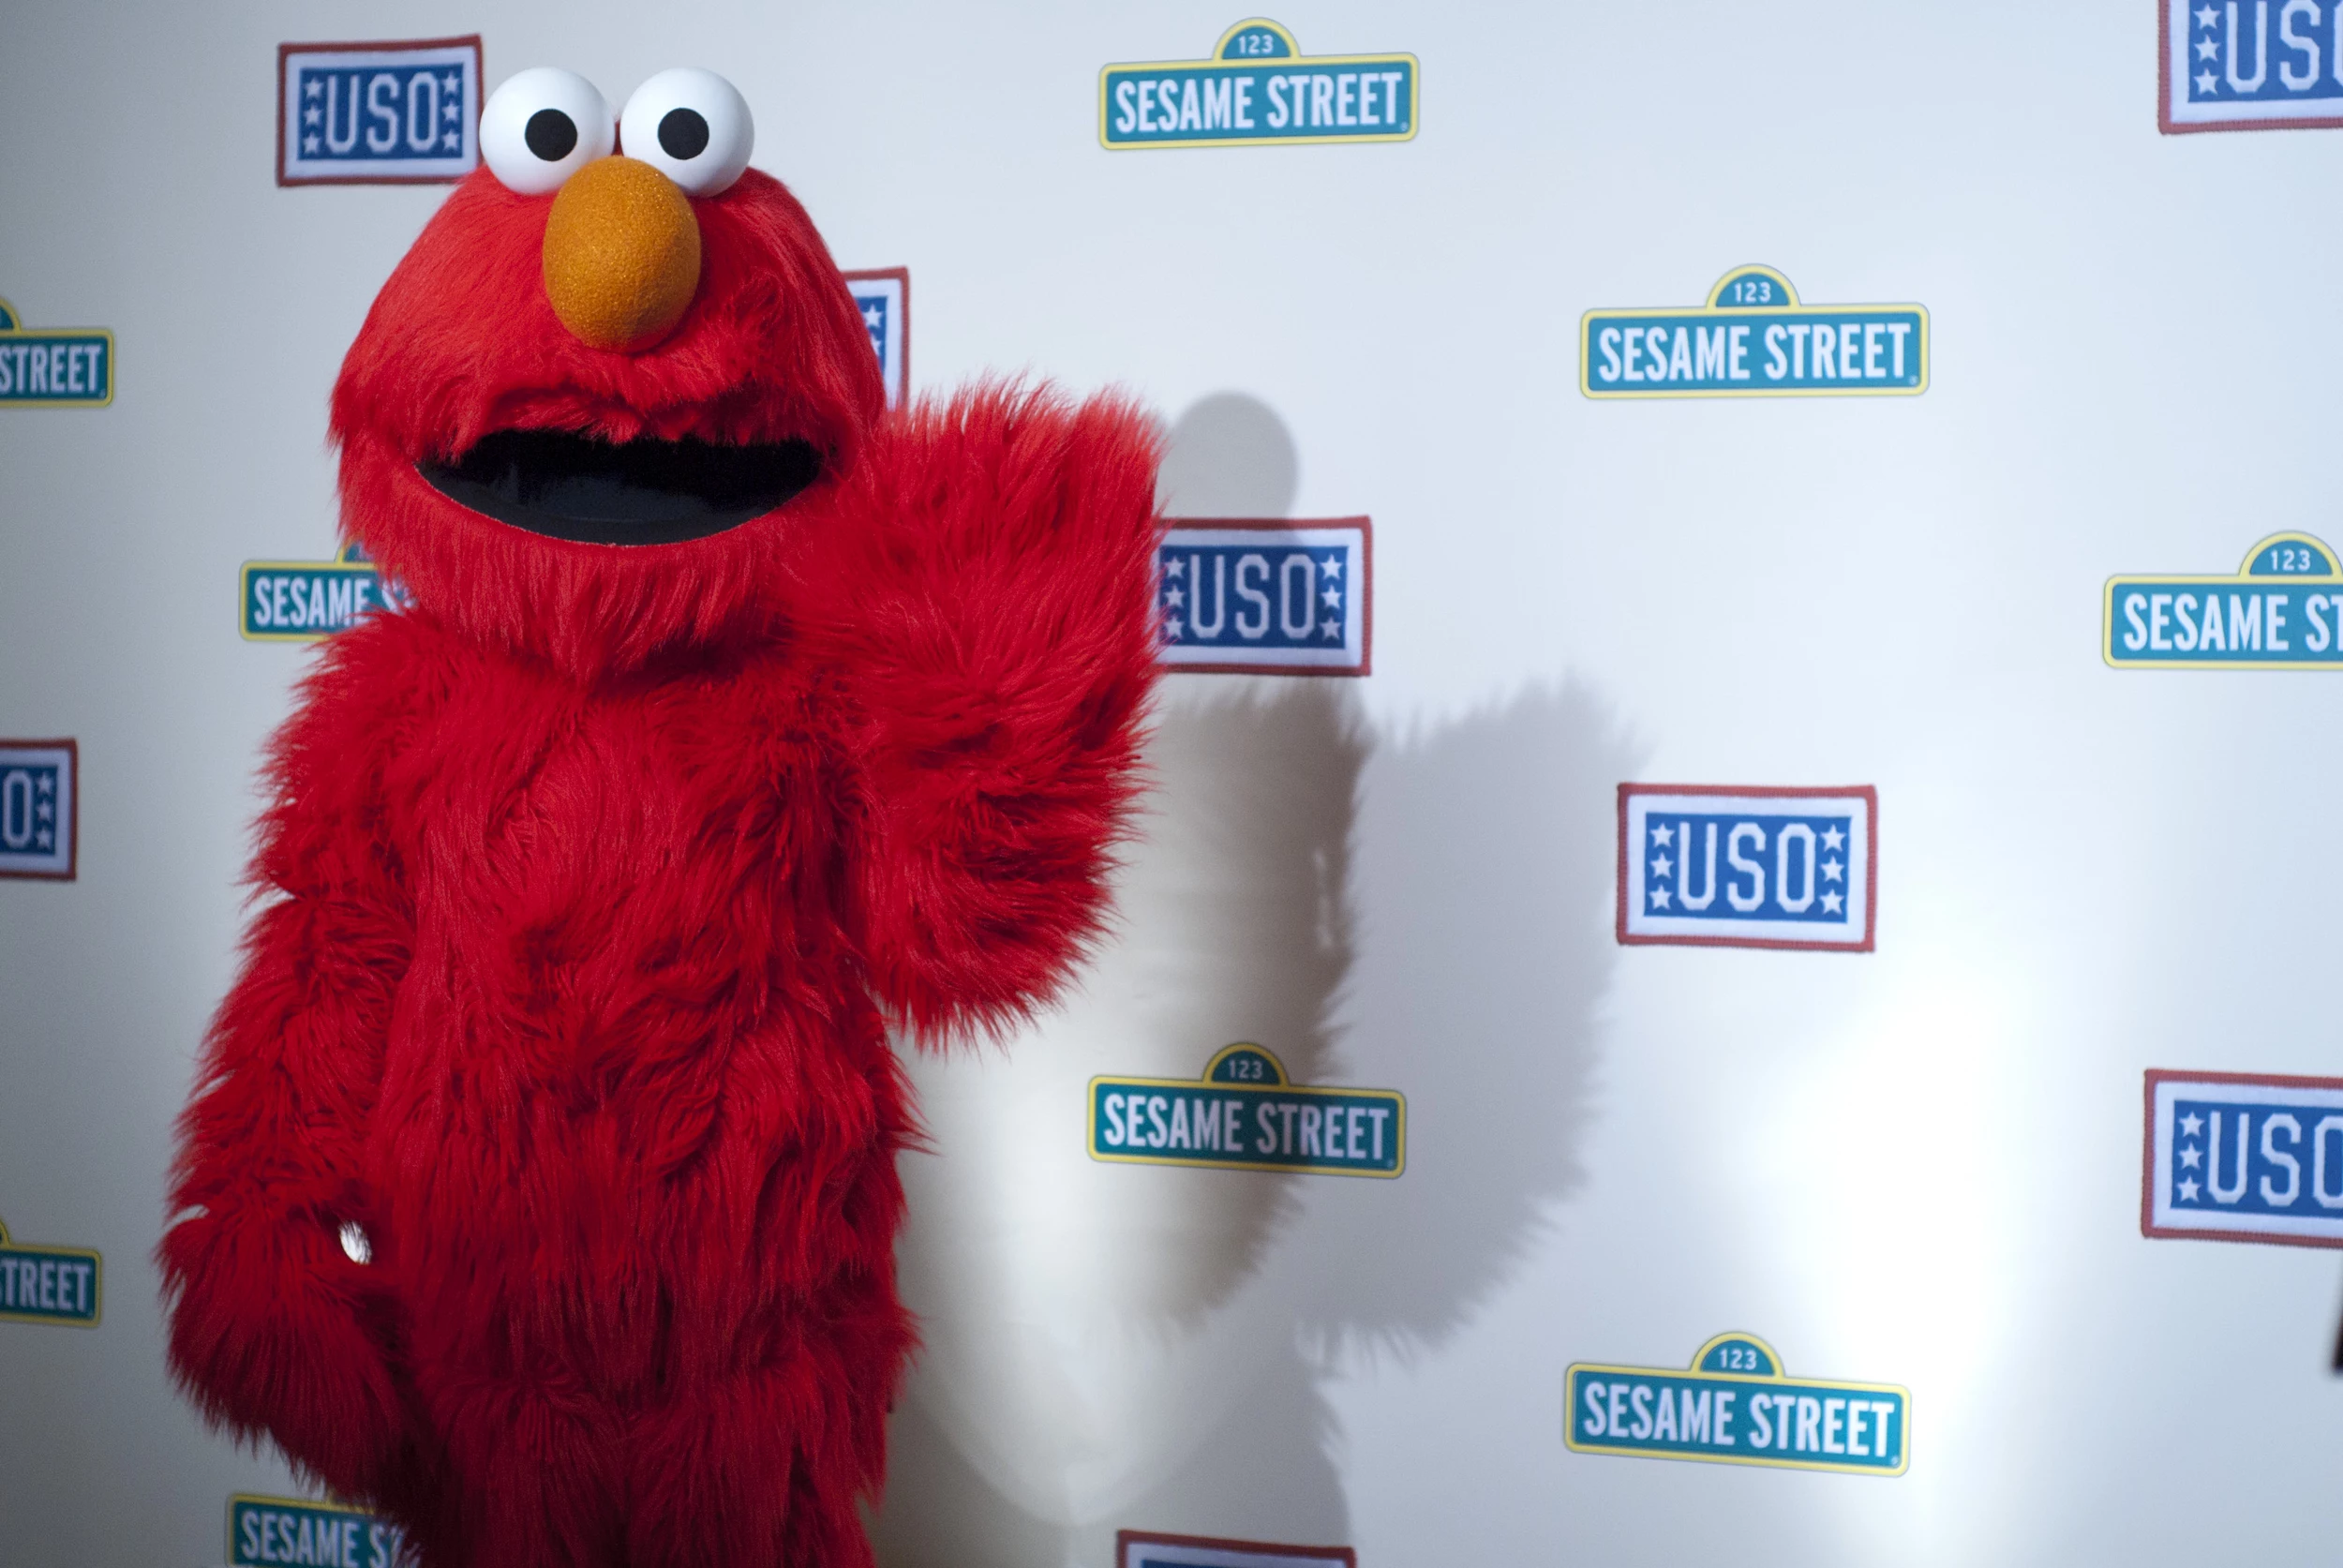 Formindske Soldat royalty Sesame Street In Search of New Elmo Voice After Kevin Clash Resigns